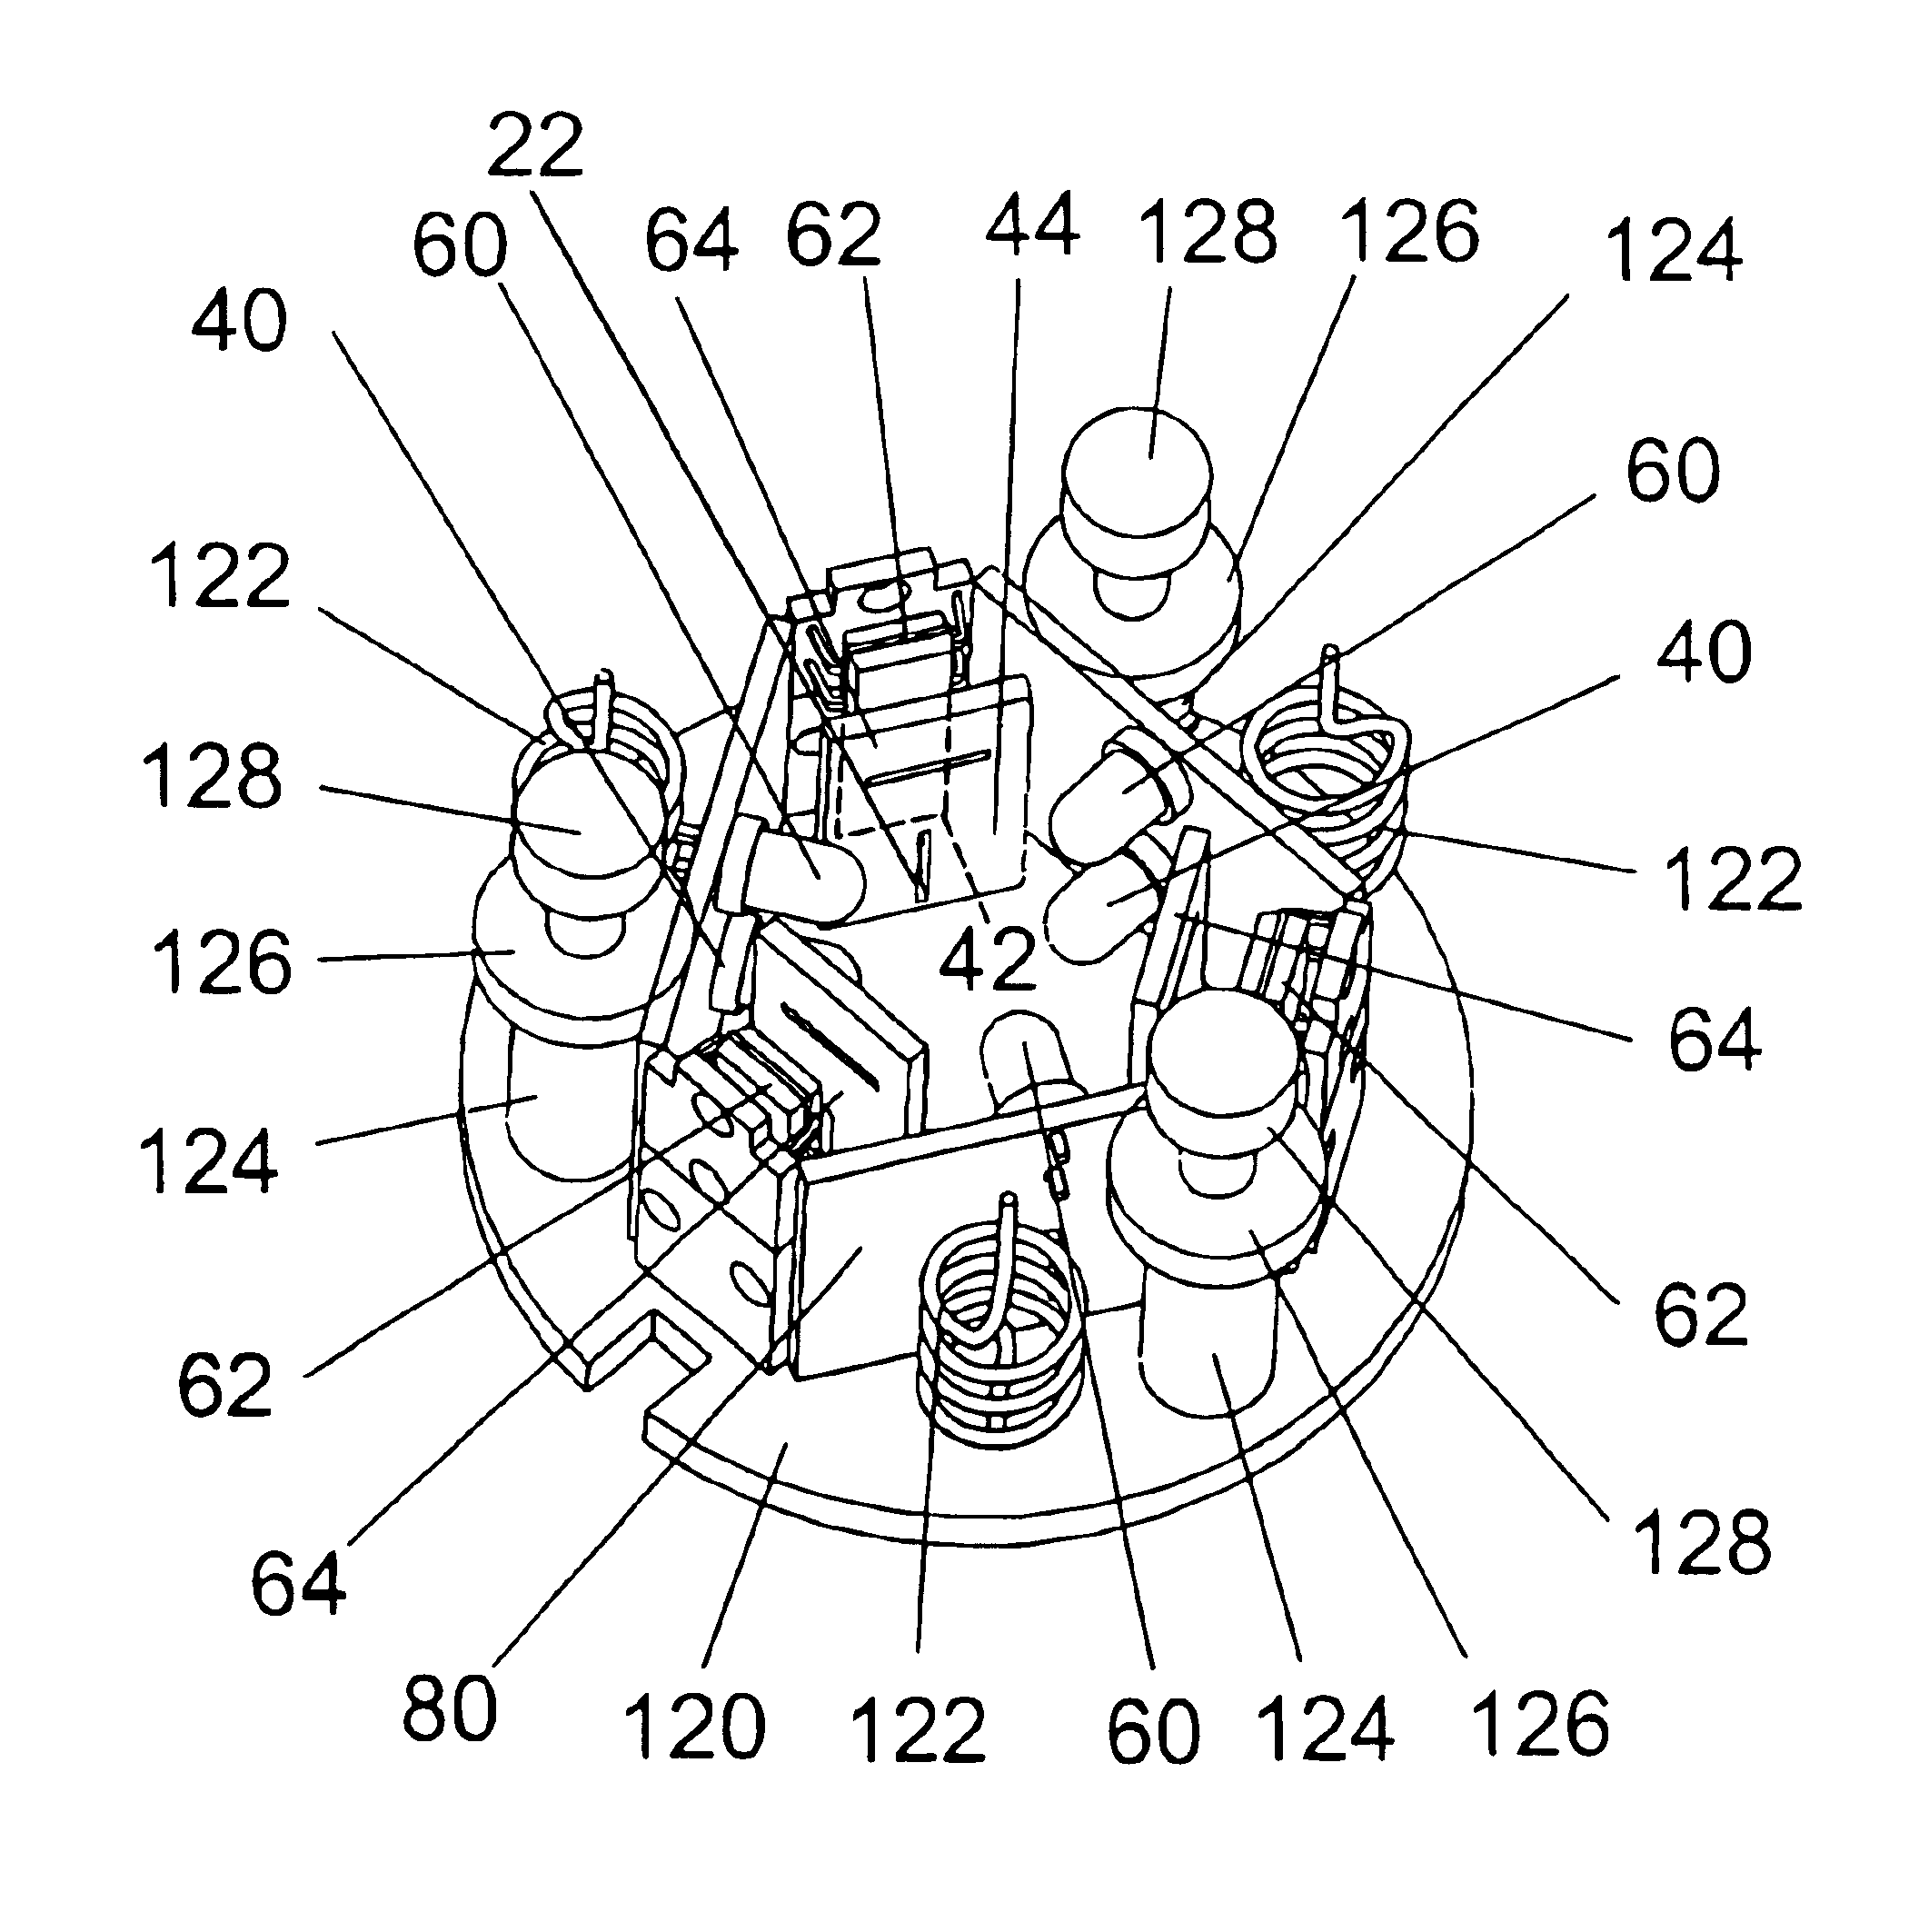 Arrangement for the detection of relative movements or relative position of two objects